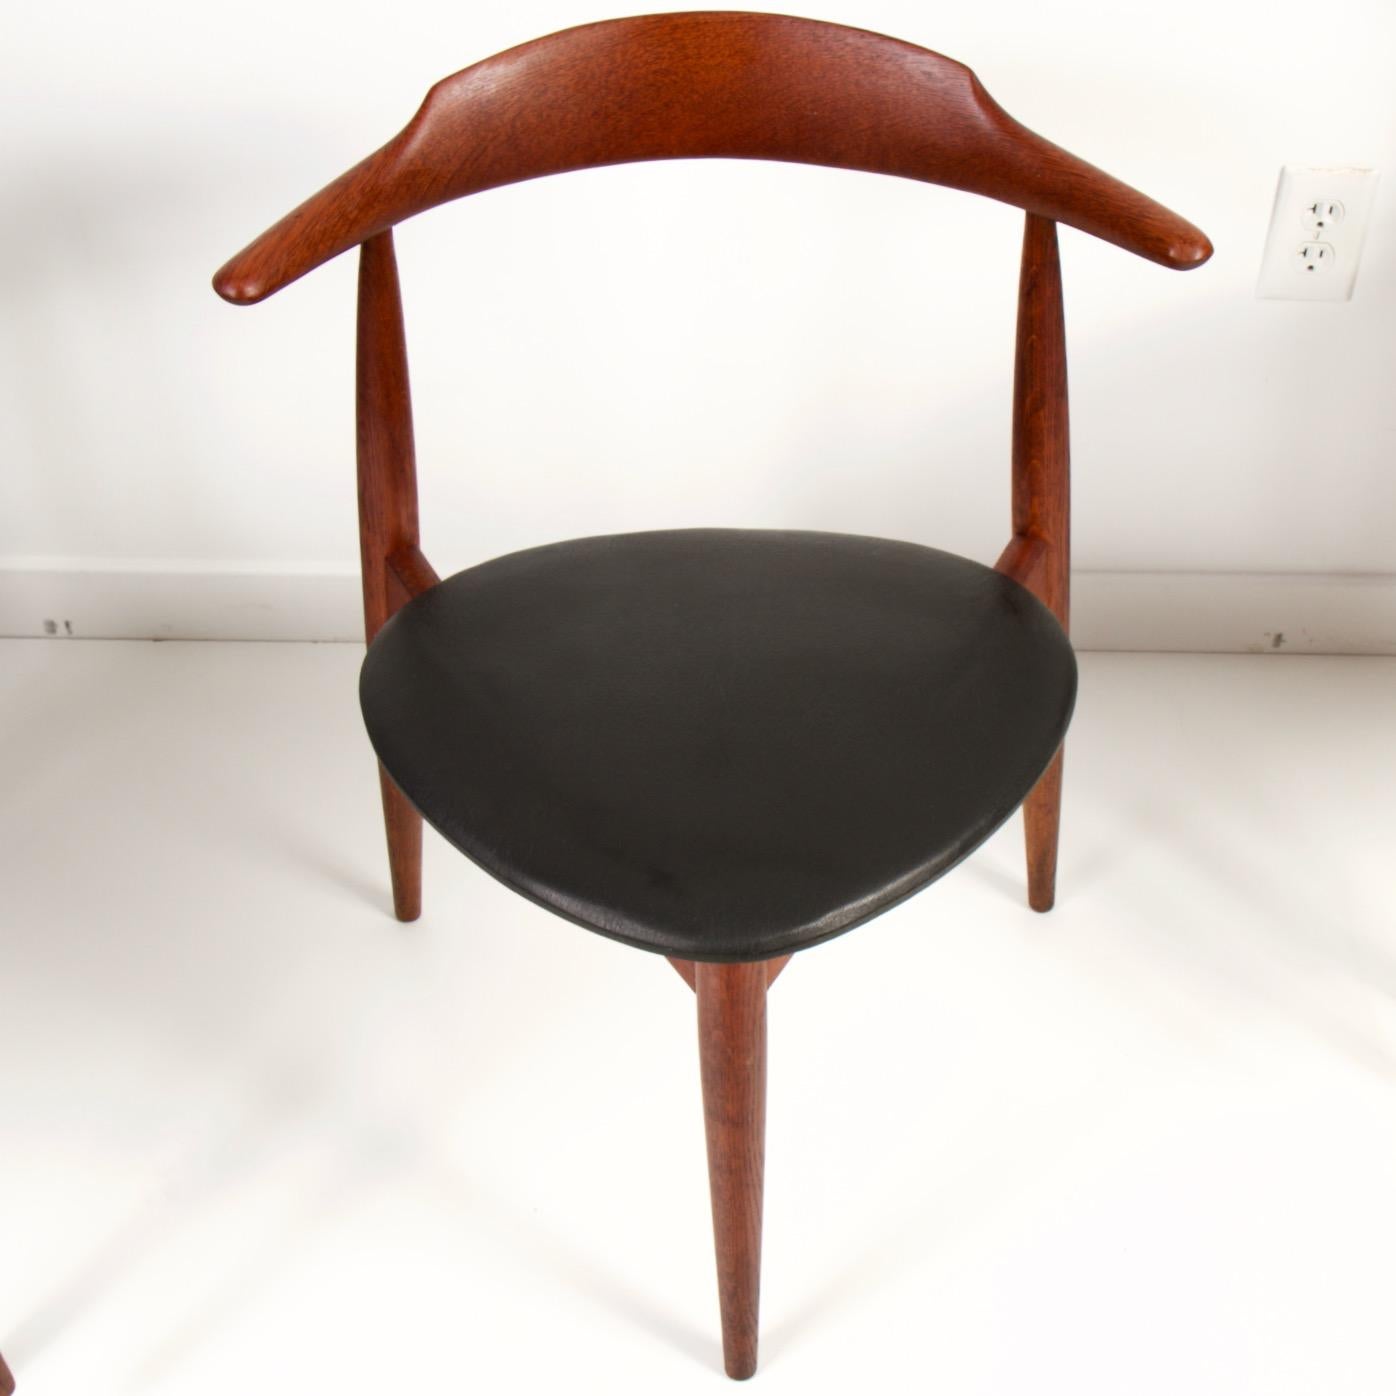 Fritz Hansen dining chairs, designed by Hans Wegner in the 1950s. Original unrestored set of fumed oak stacking chairs with Naugahyde seats.
Very nice vintage condition.
   